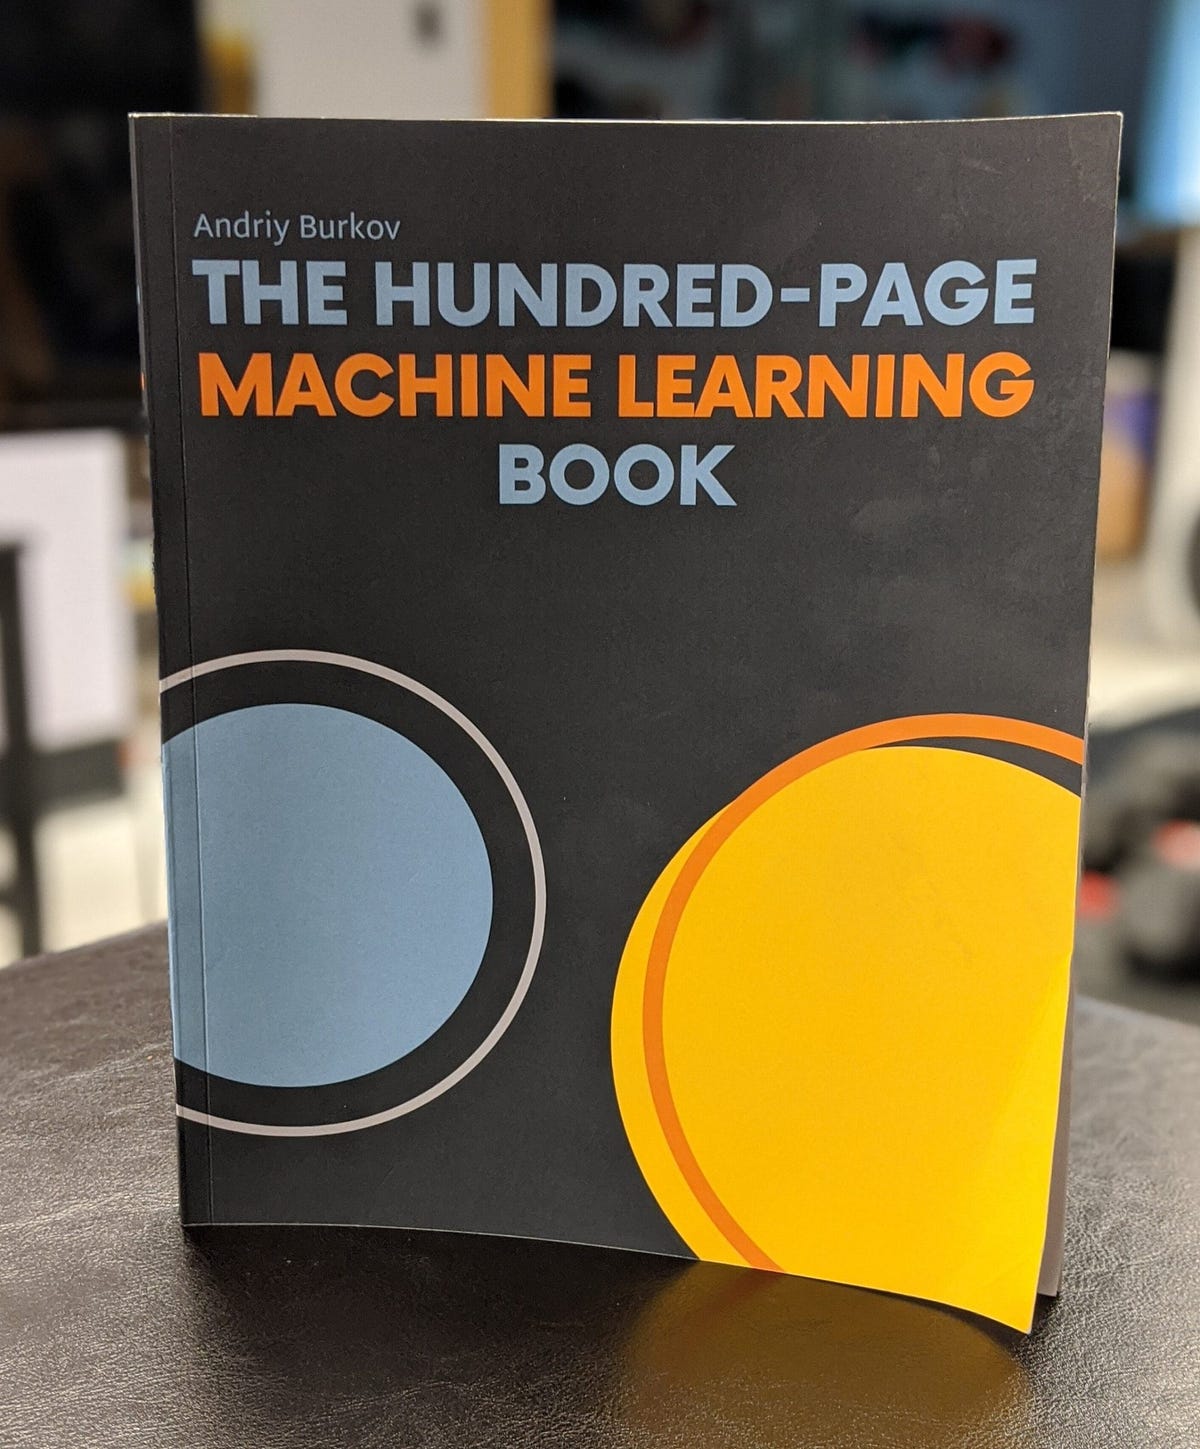 Machine Learning - Five Books Expert Reviews